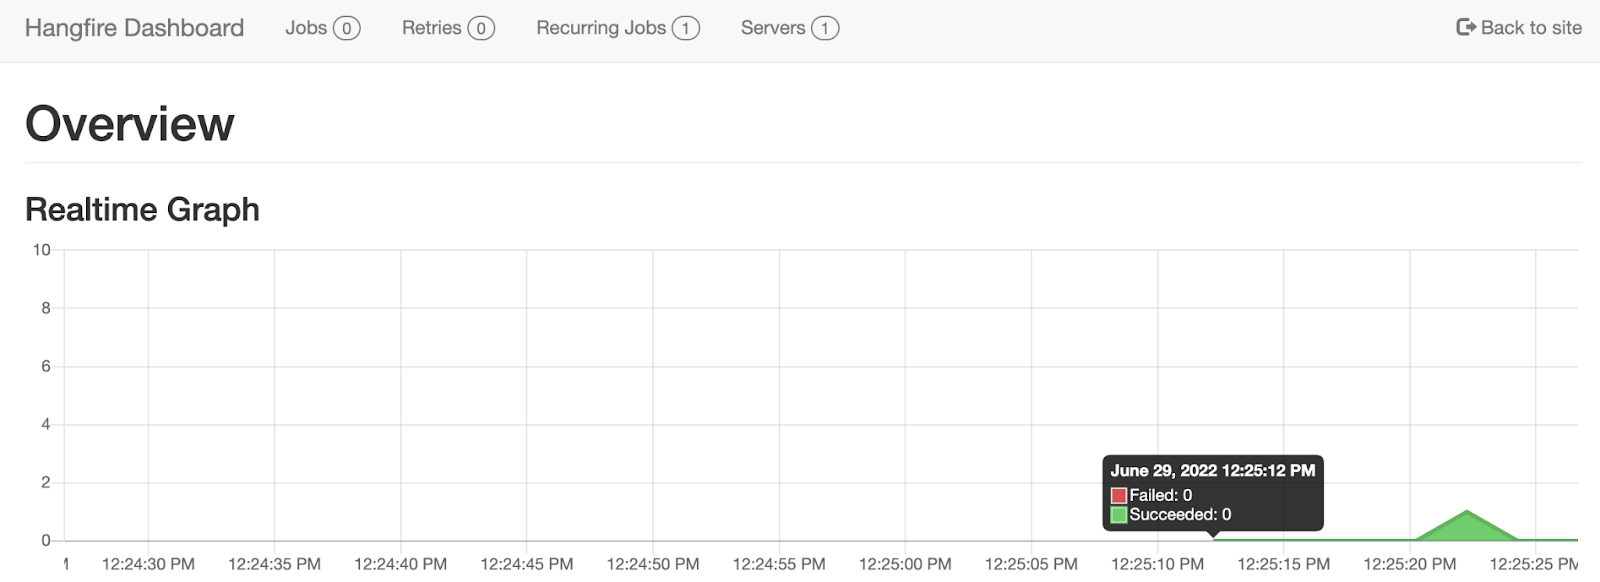 The Hangfire dashboard showing a realtime graph of failed and succeeded jobs.